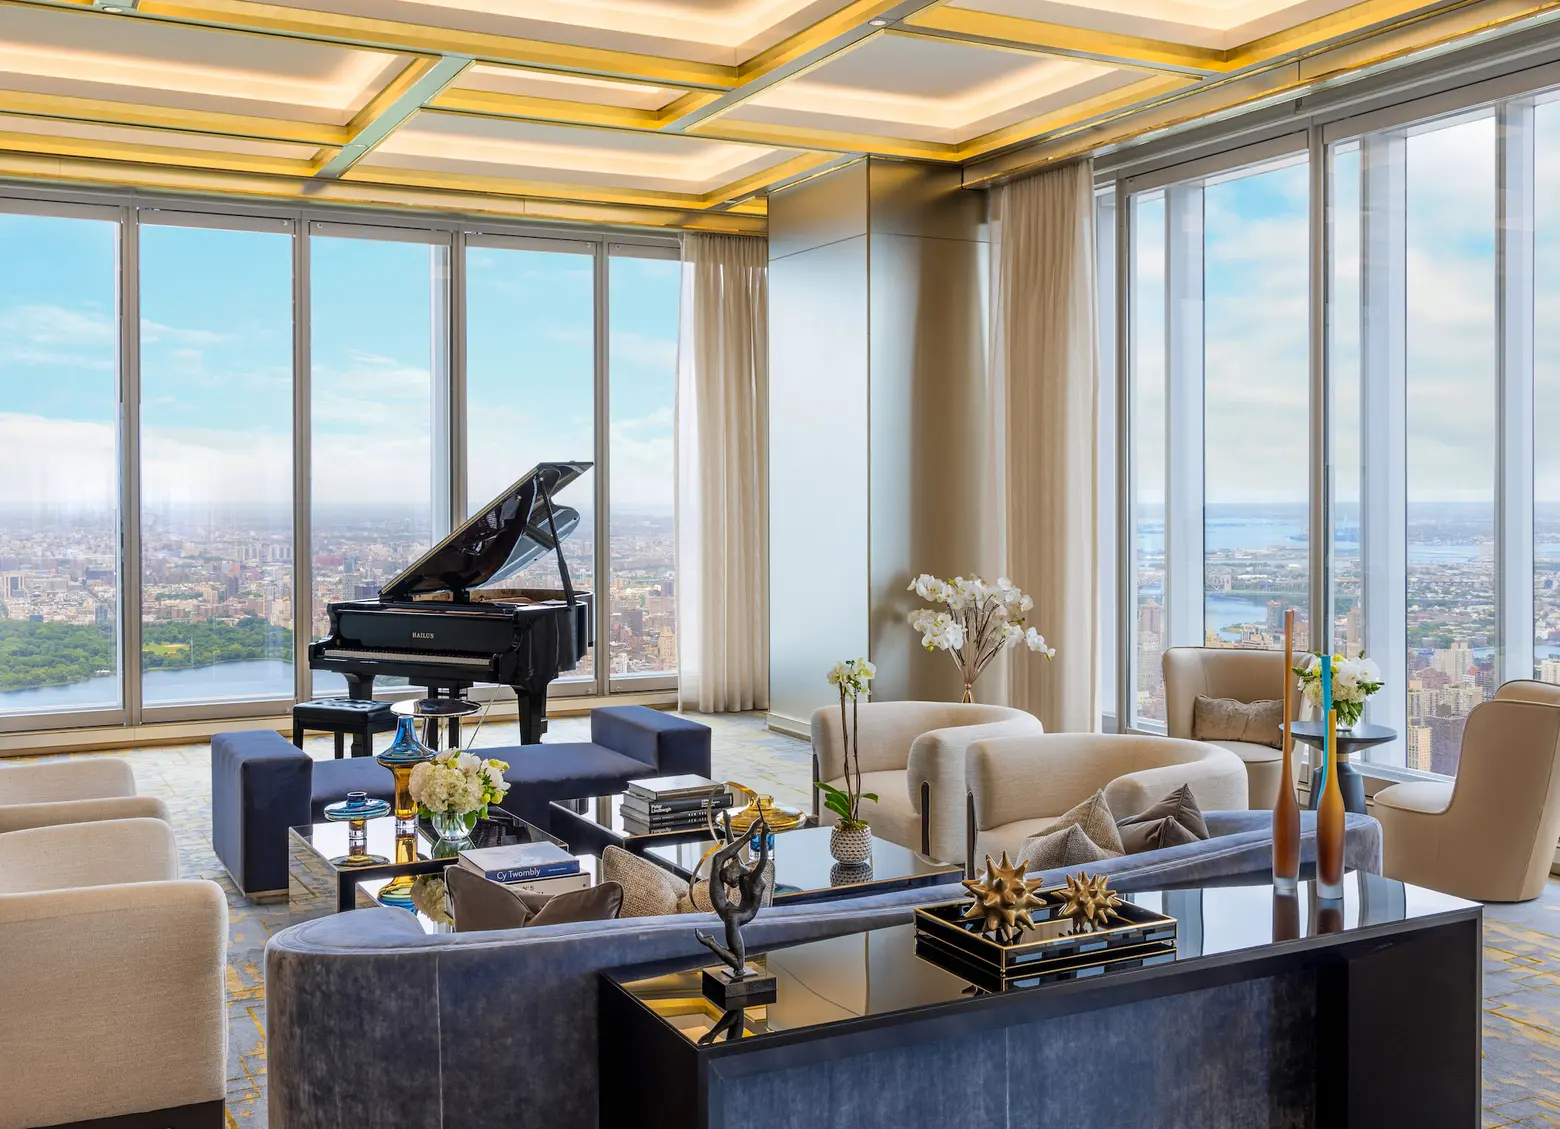 See inside Central Park Tower’s newly-unveiled 100th floor amenities club